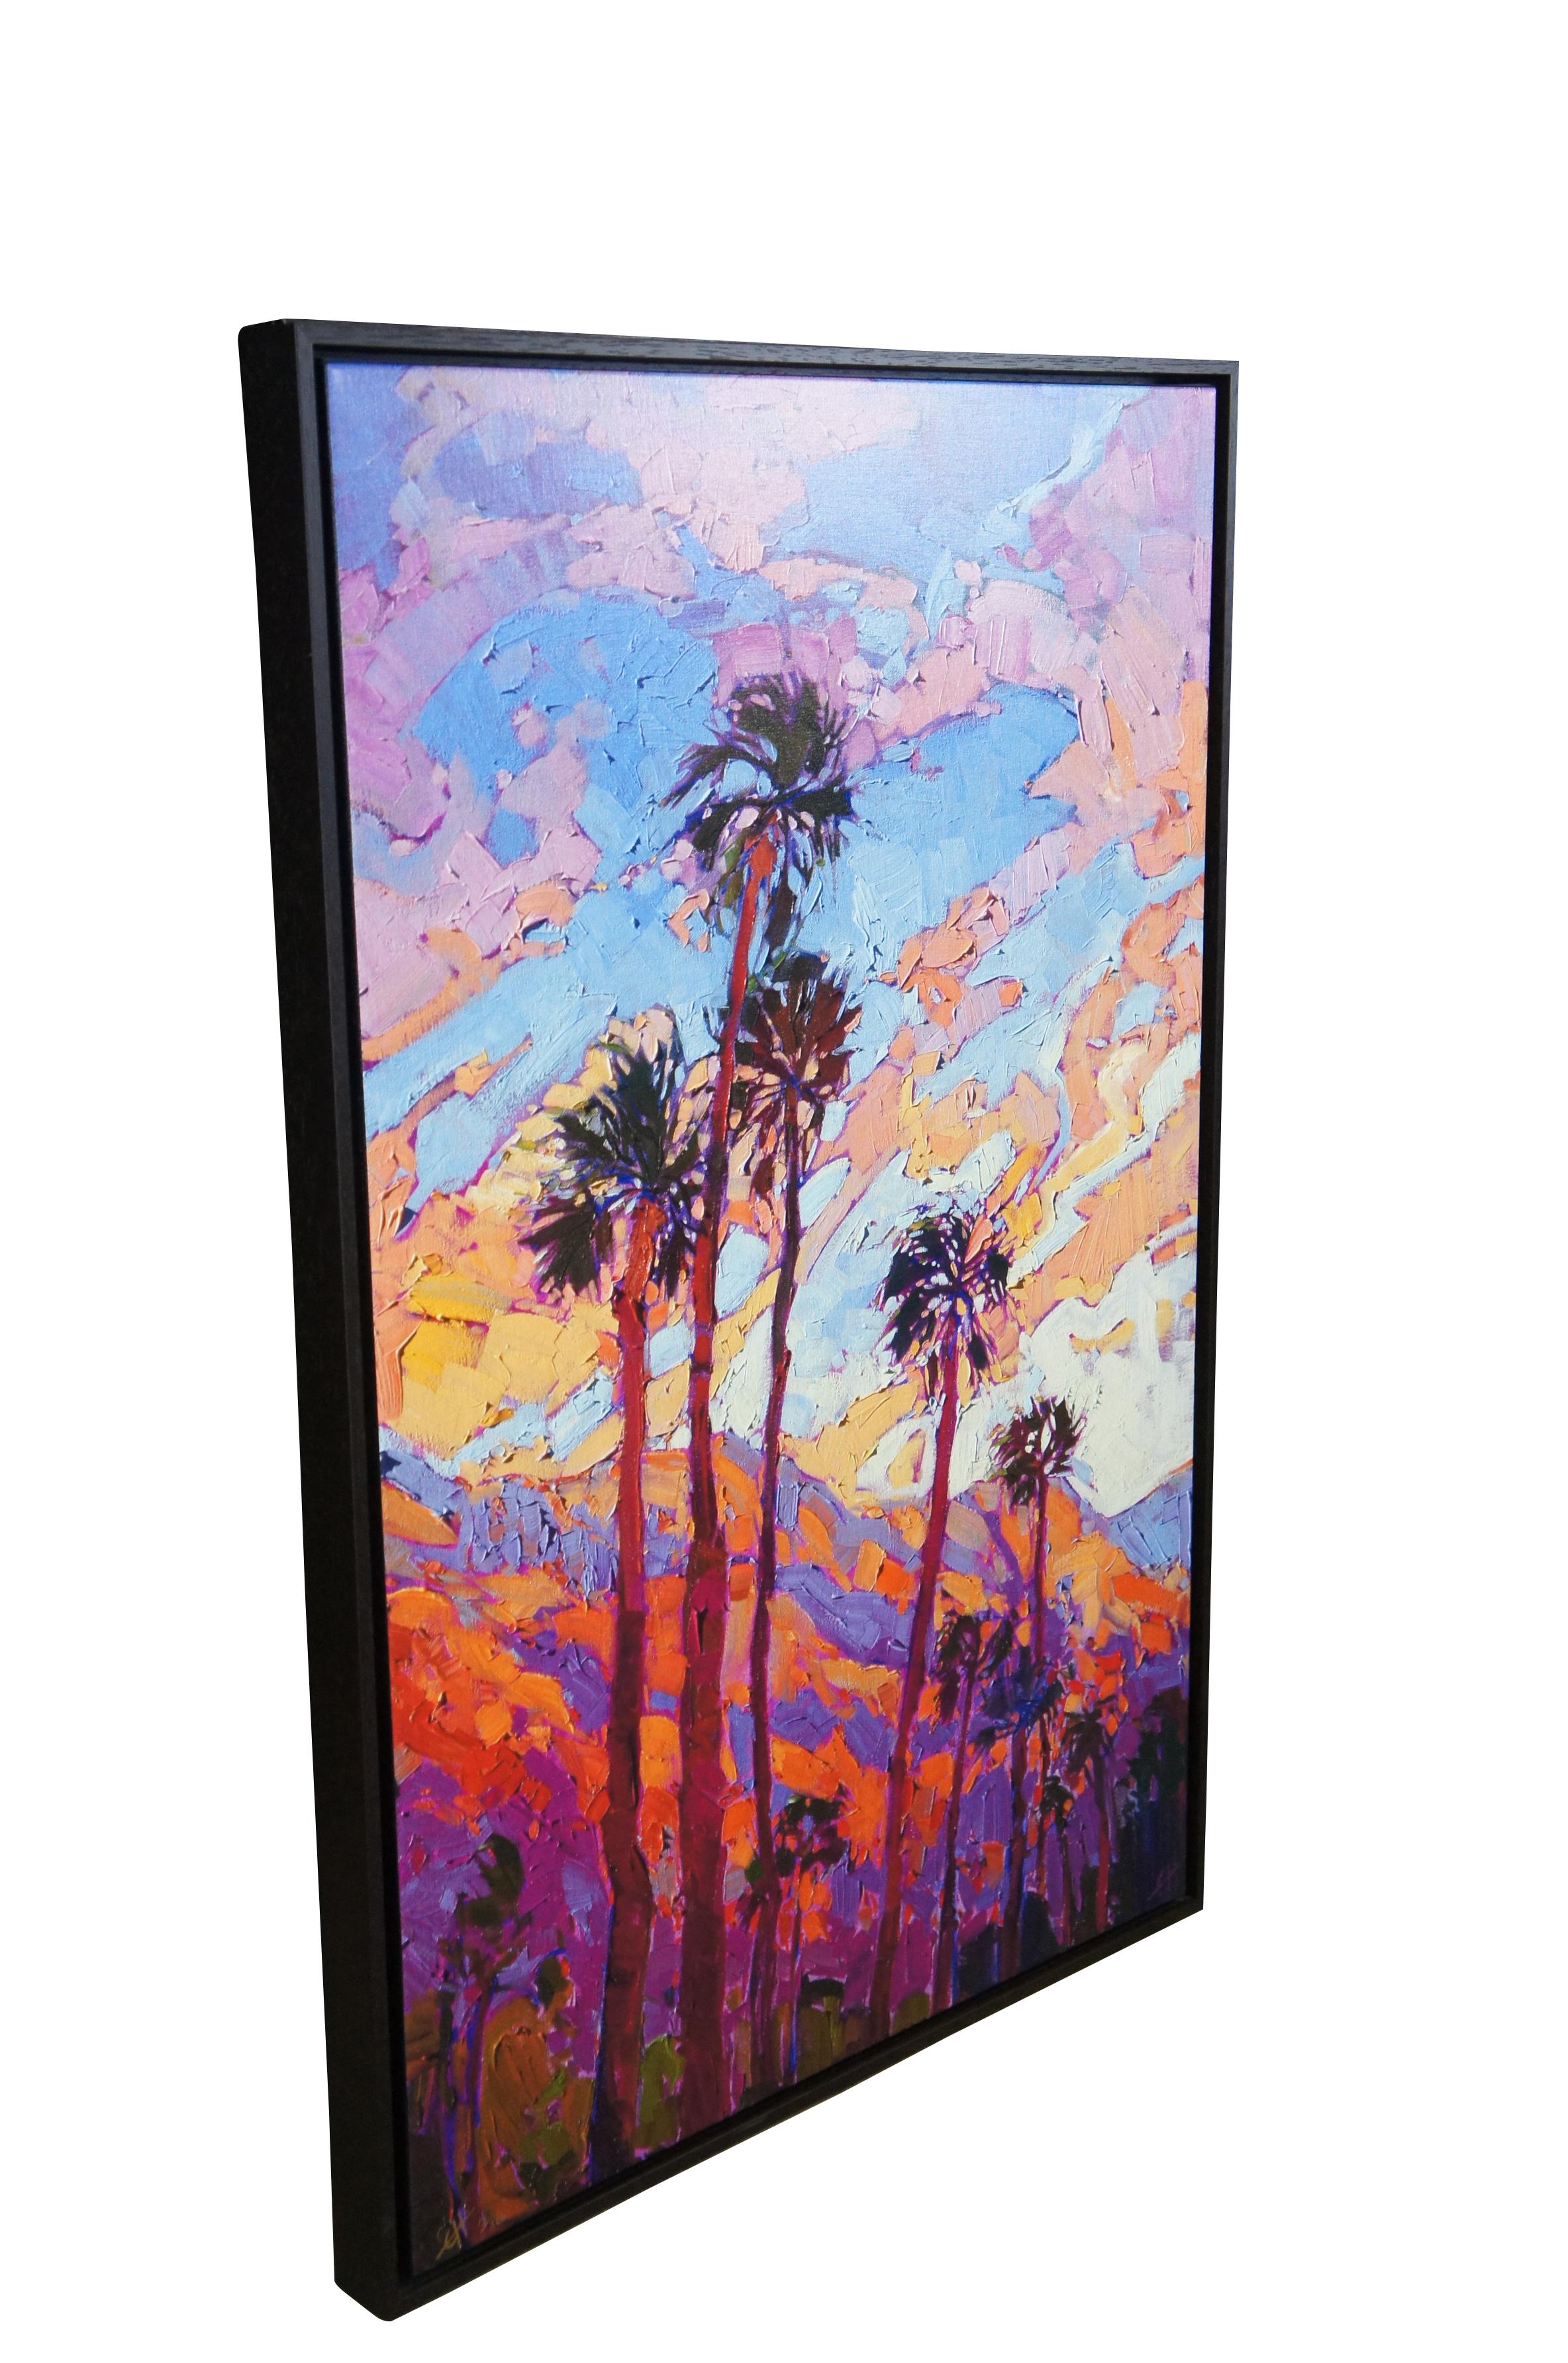 A celebration of color, this painting of Palm Springs captures the brilliant sunsets only seen in the dry desert air. The distant mountain range soaks in the warm rays cast by the setting sun, depicted with a loose brush stroke and an expressionist